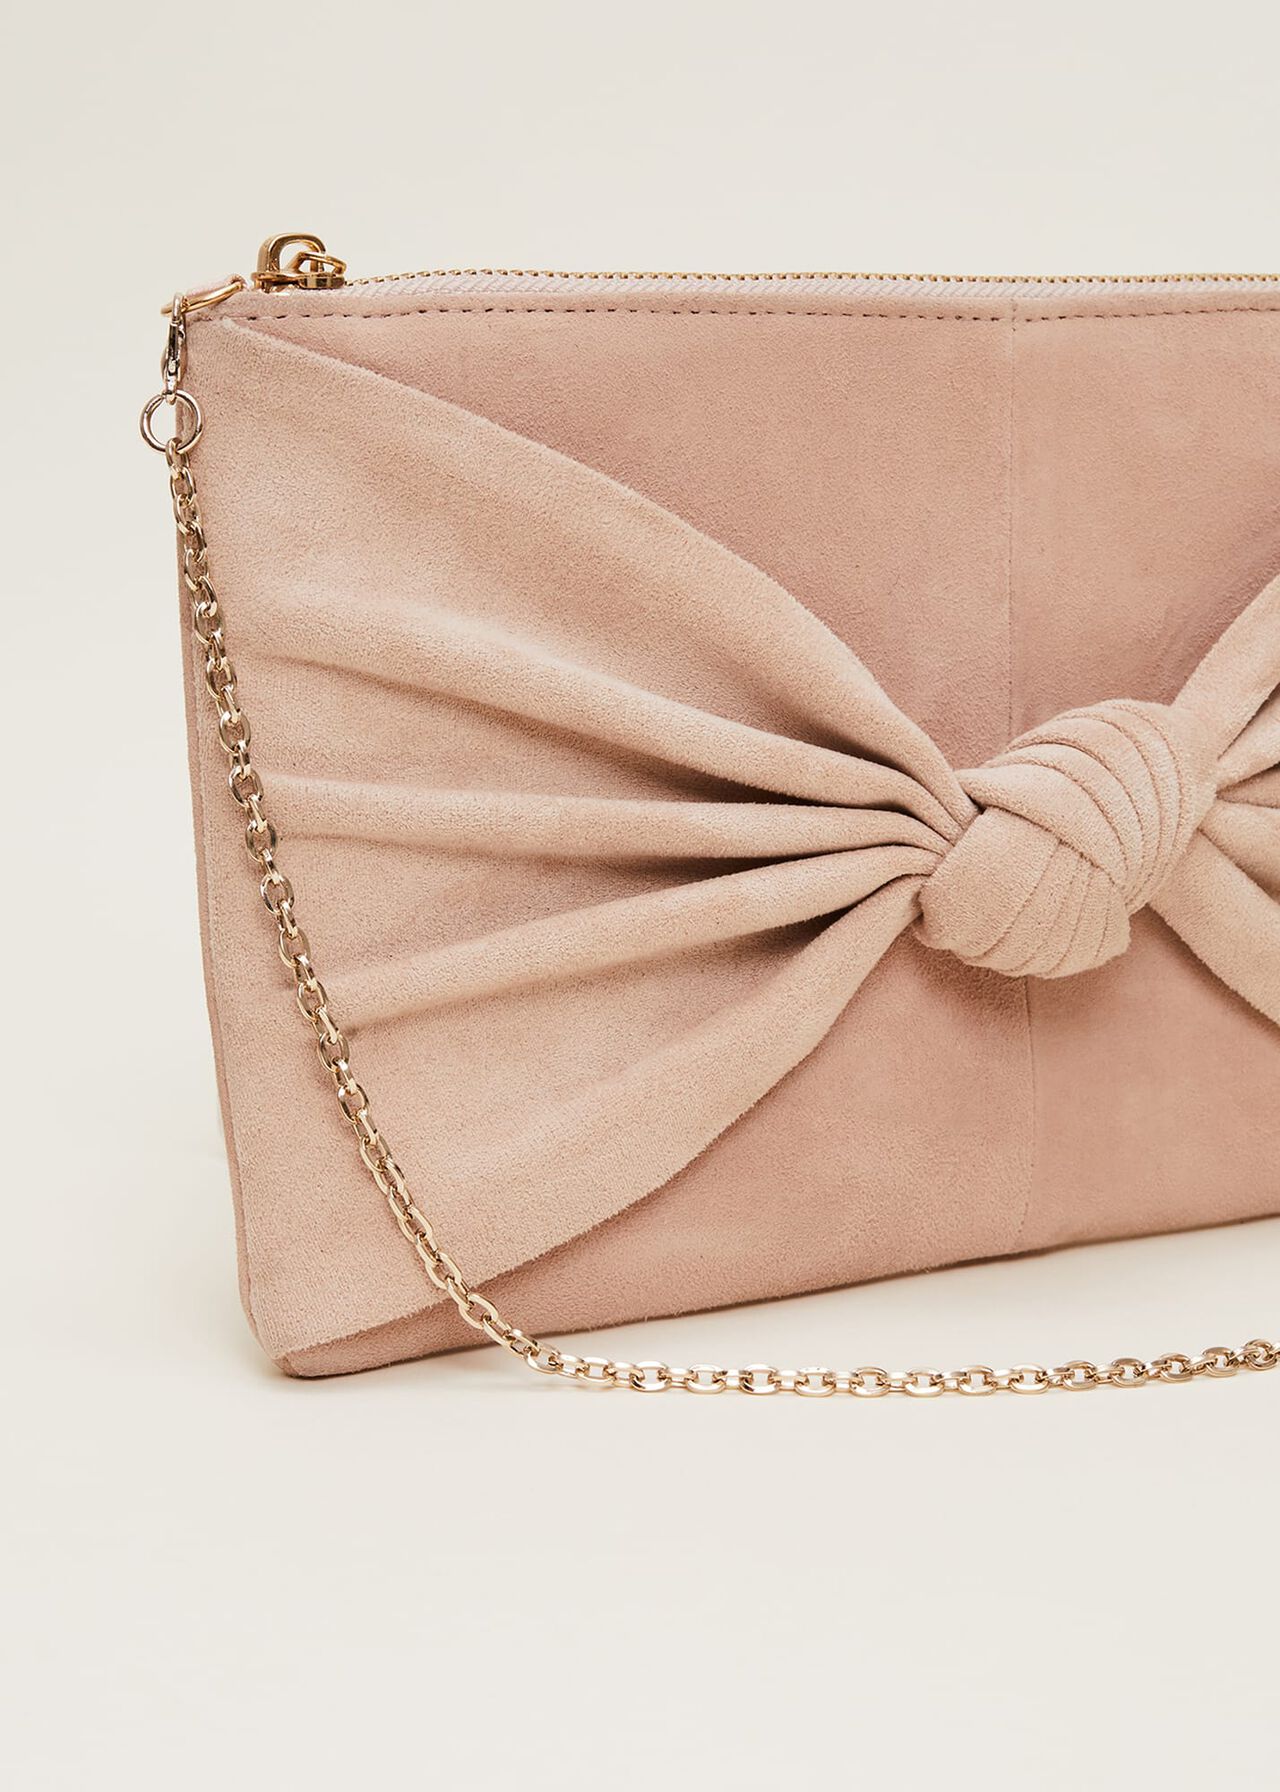 Knot Front Suede Clutch